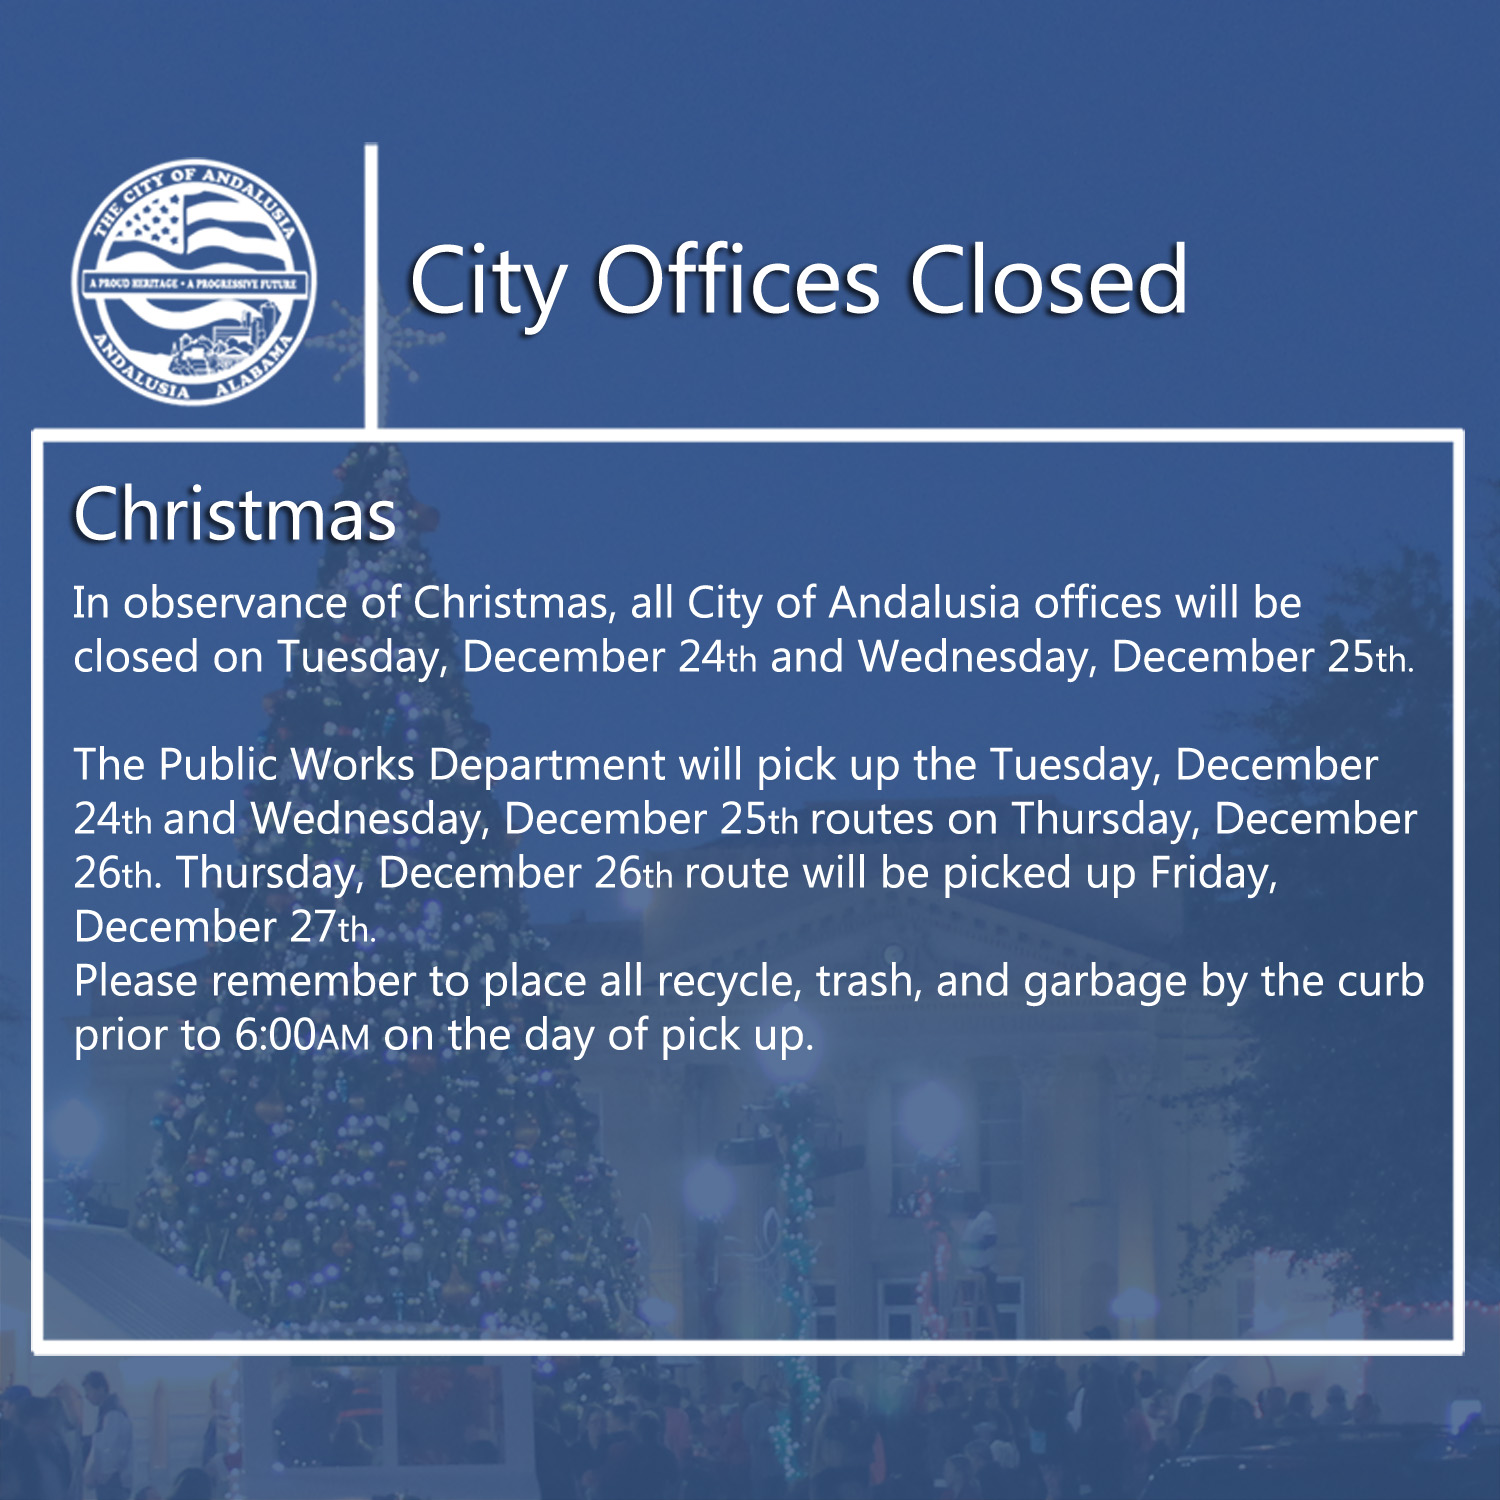 Facebook City Offices Closed Christmas 2019